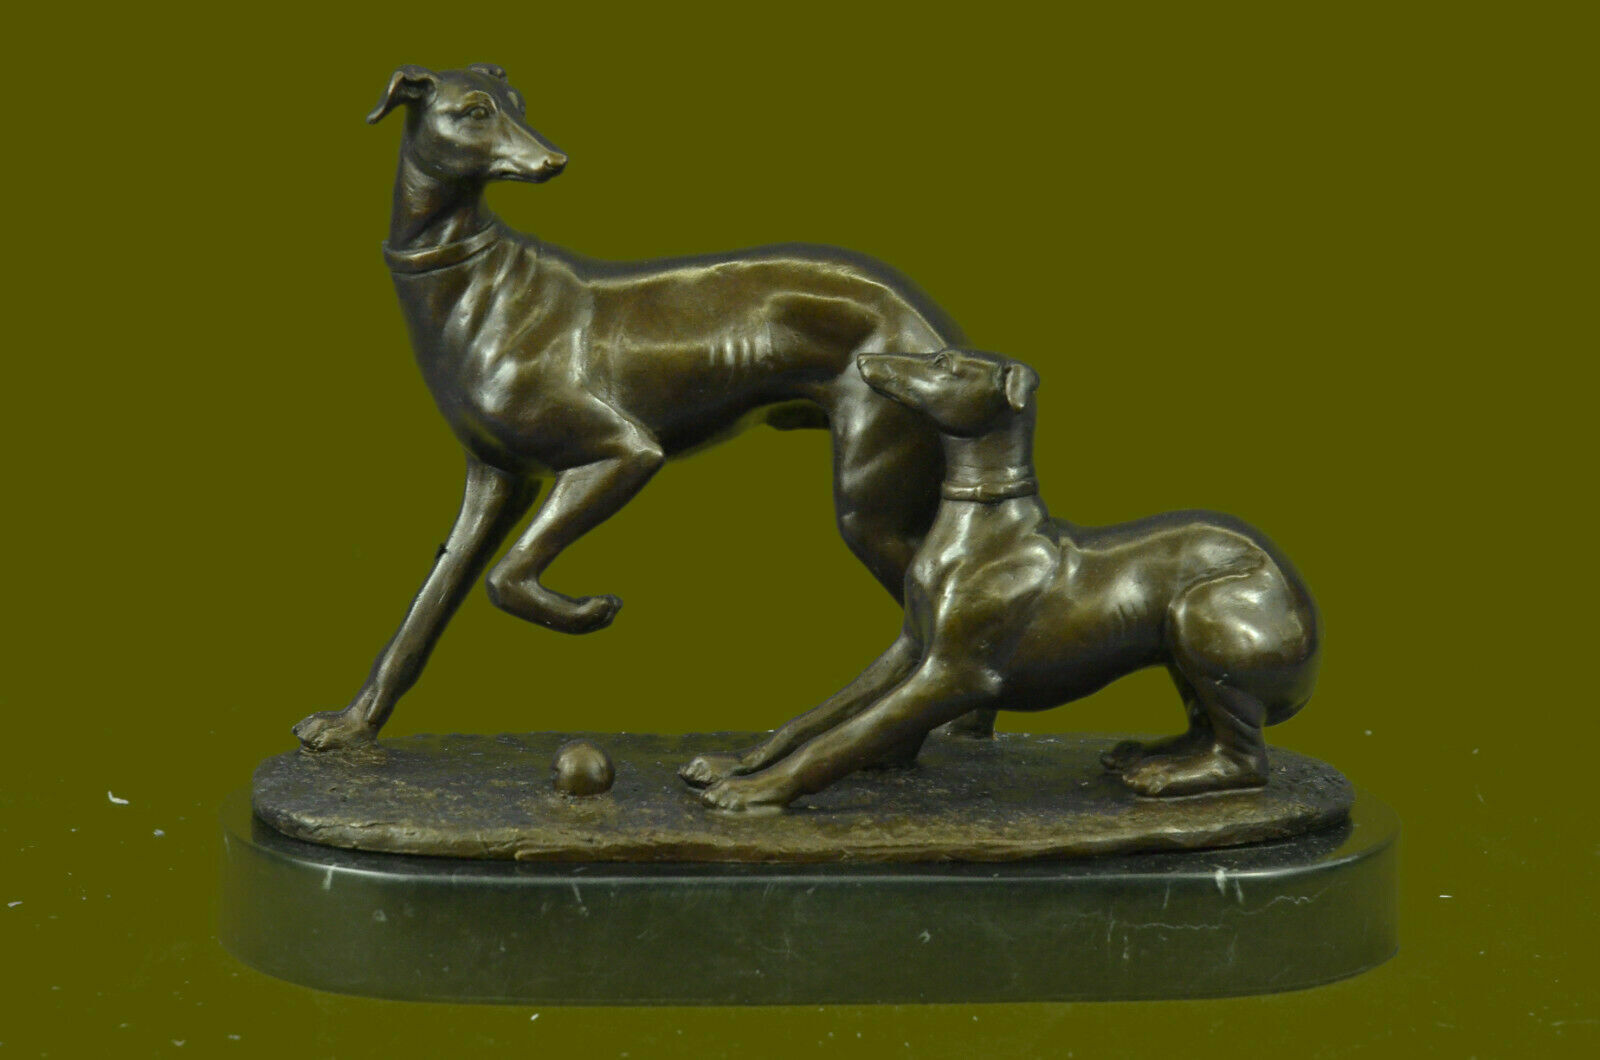 Two Cute Greyhound Dogs Figurine Hand Art Deco Museum And High Quality Artwork